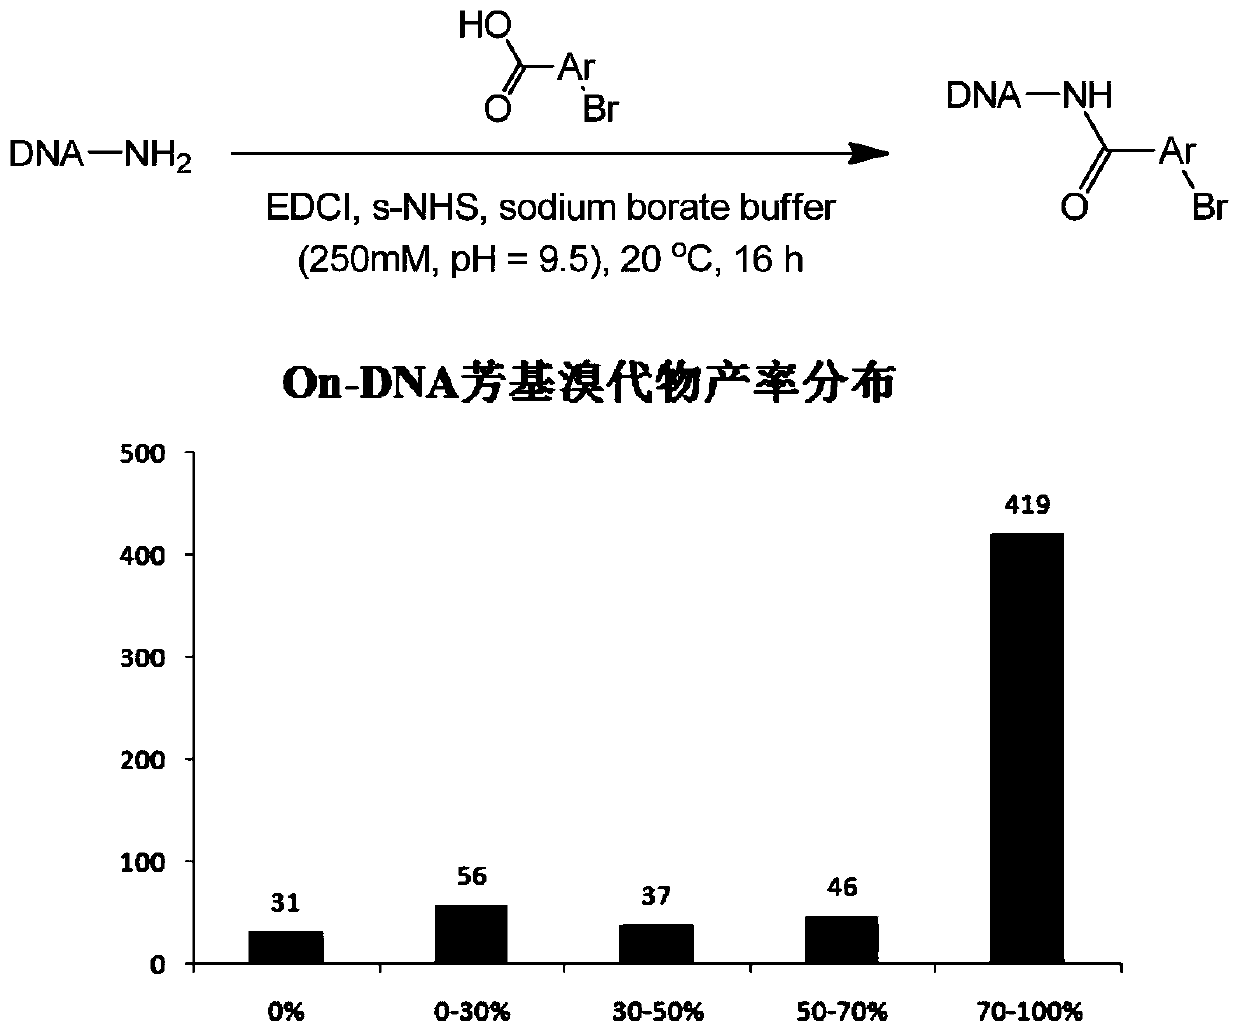 Method for obtaining On-DNA aromatic hydrocarbon compound by Suzuki coupling reaction in construction of DNA encoded compound library